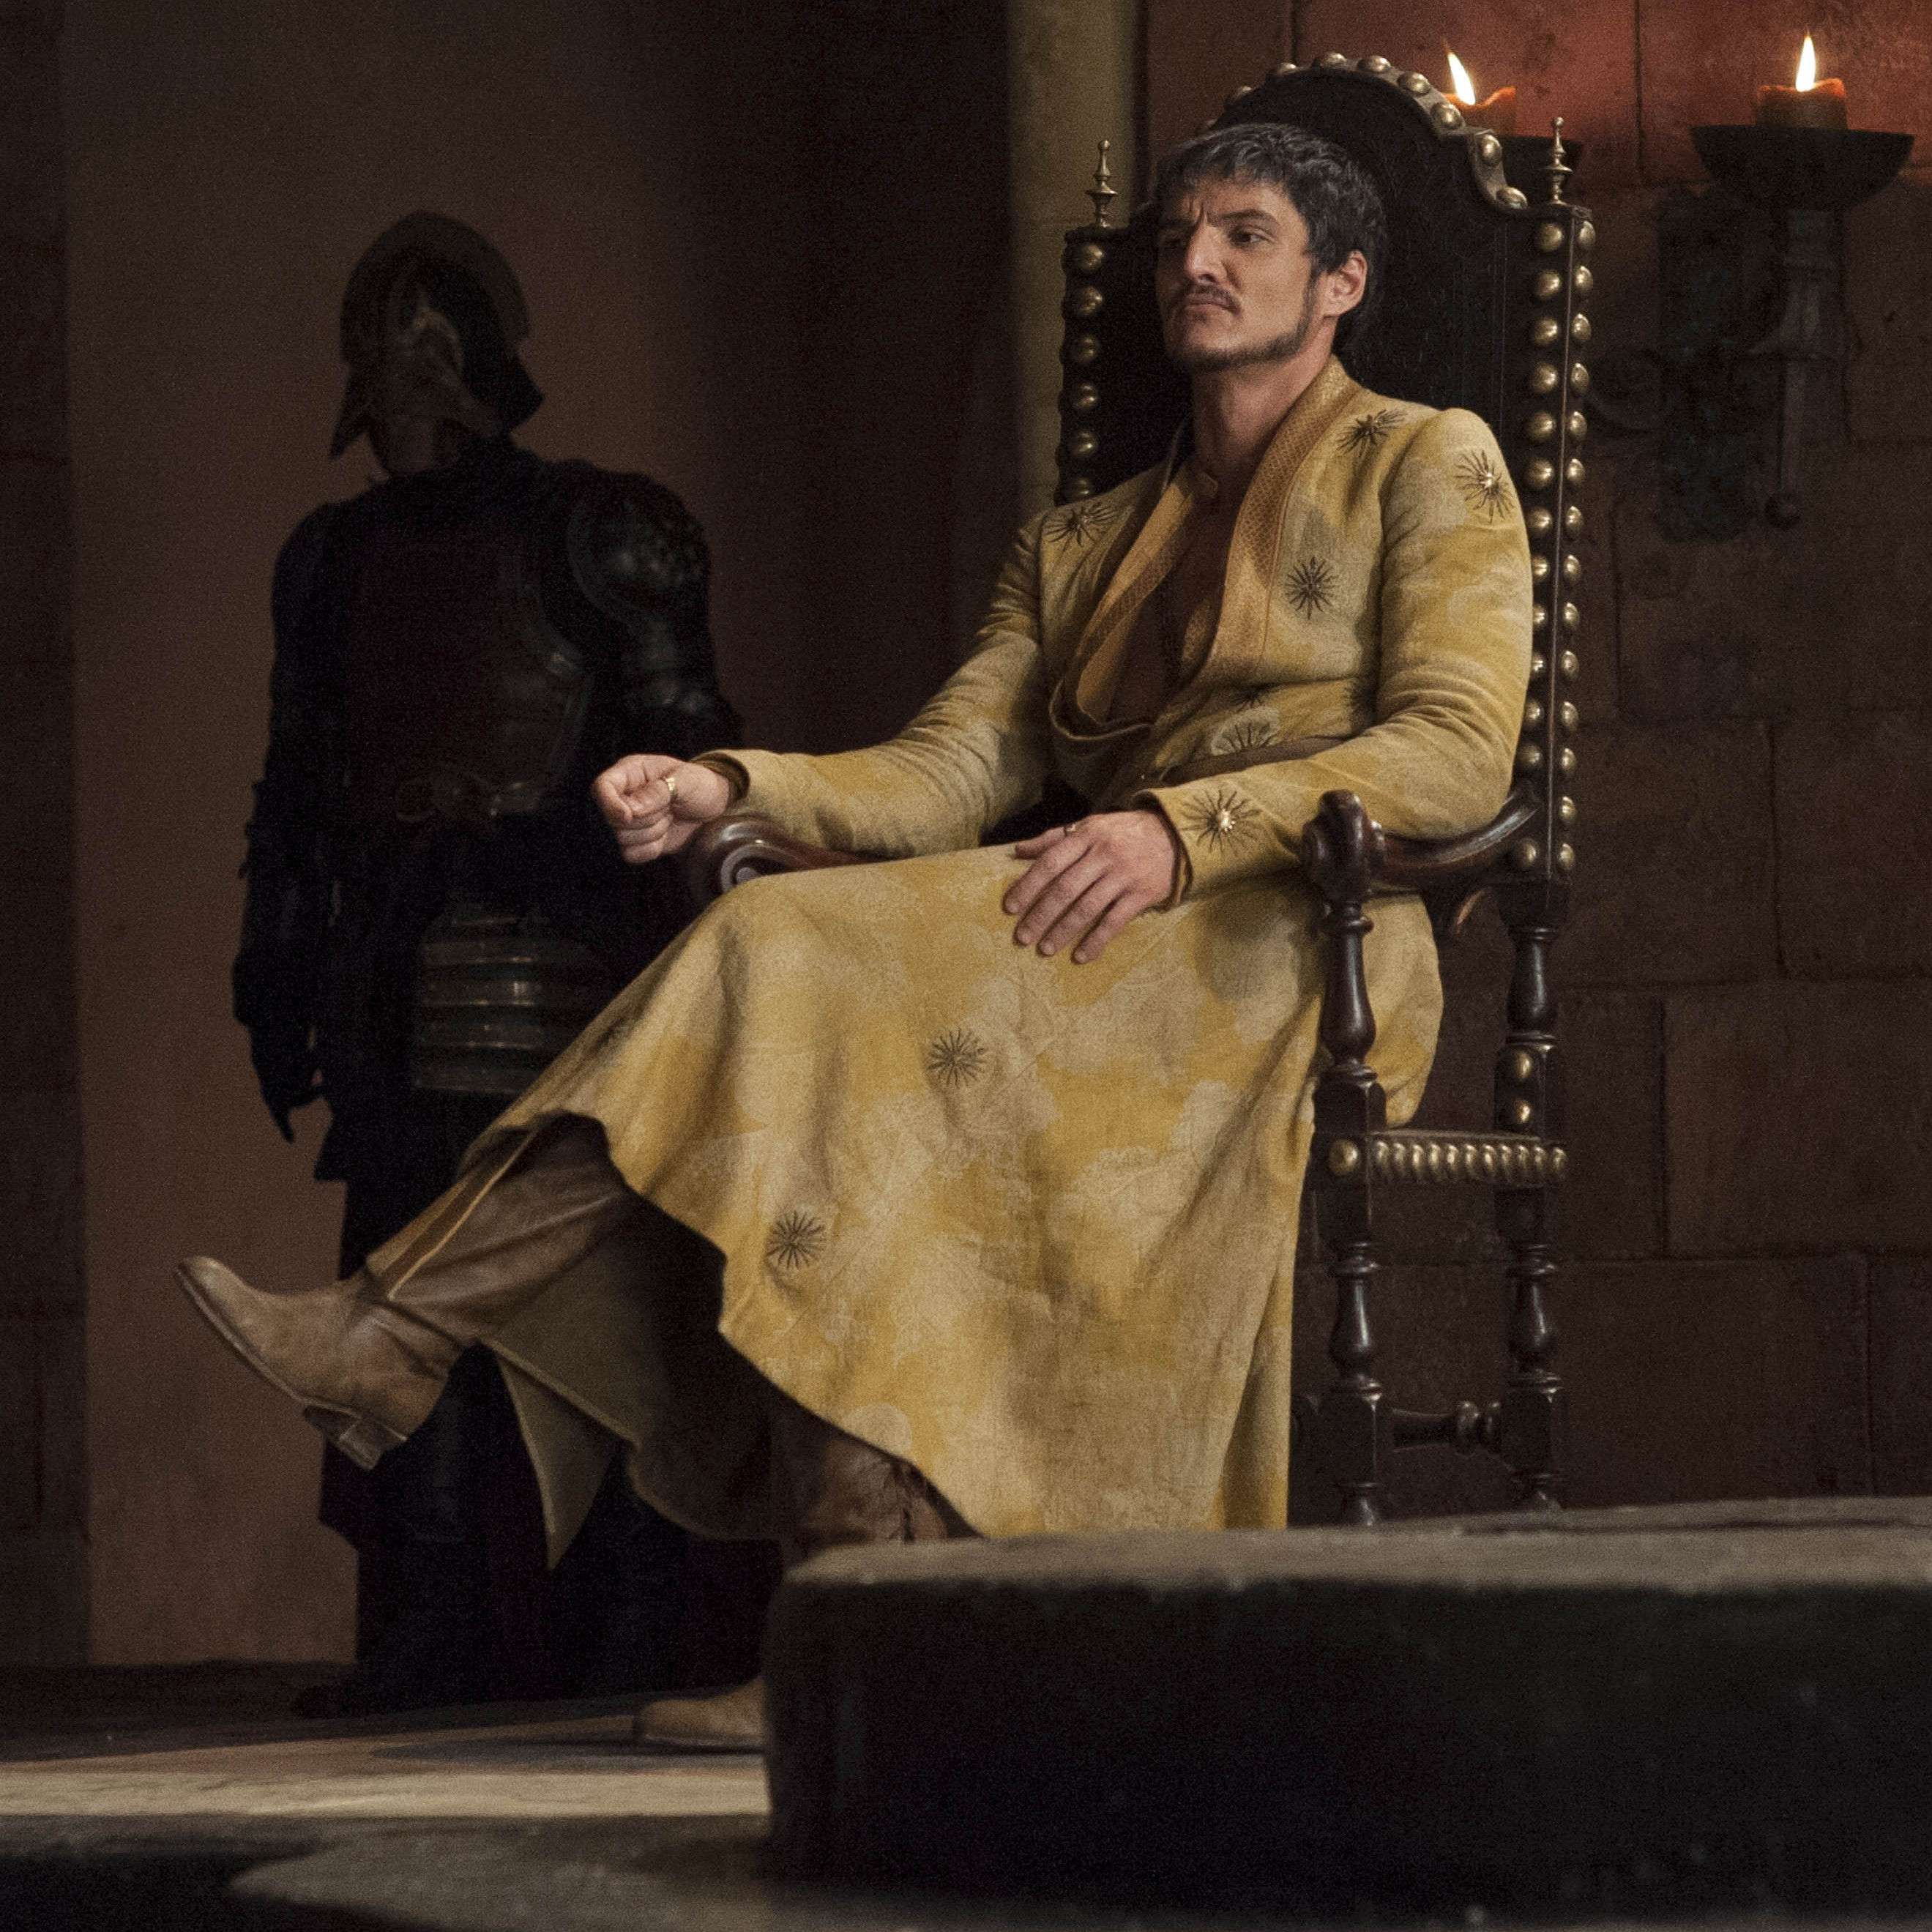 Oberyn Martell Famous Quotes | Game of Thrones Quote